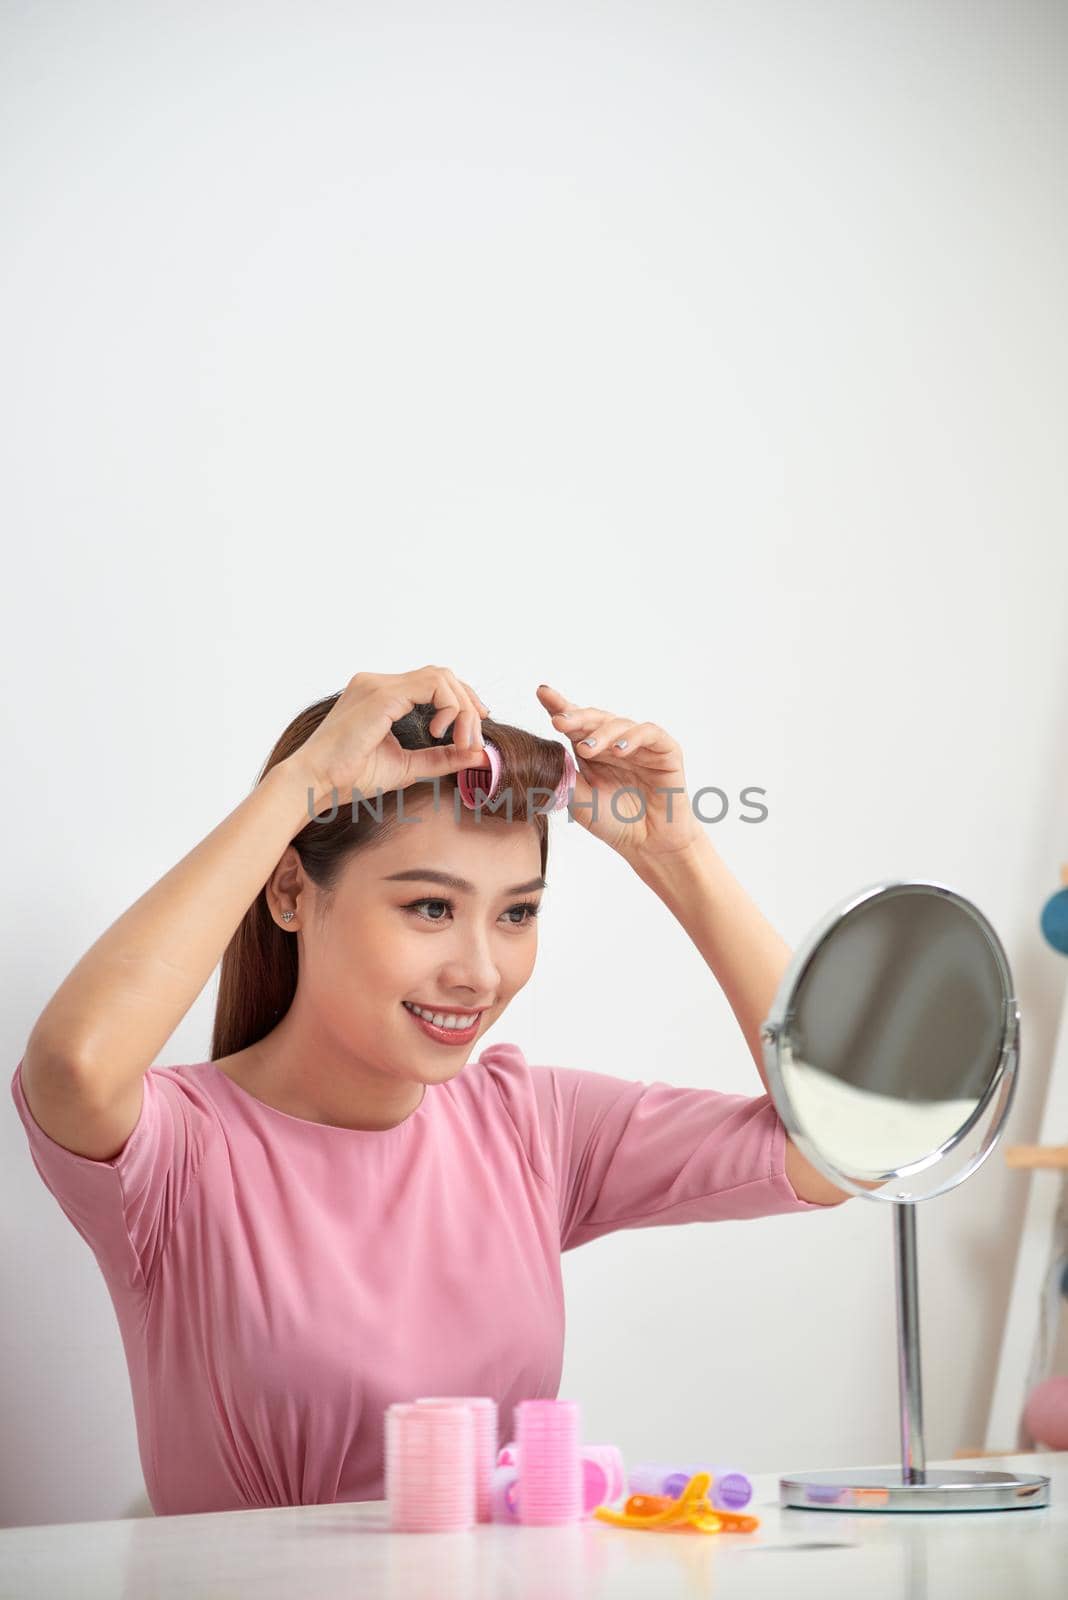 Beautiful woman with curlers smiling into mirror, enjoying her look, beauty